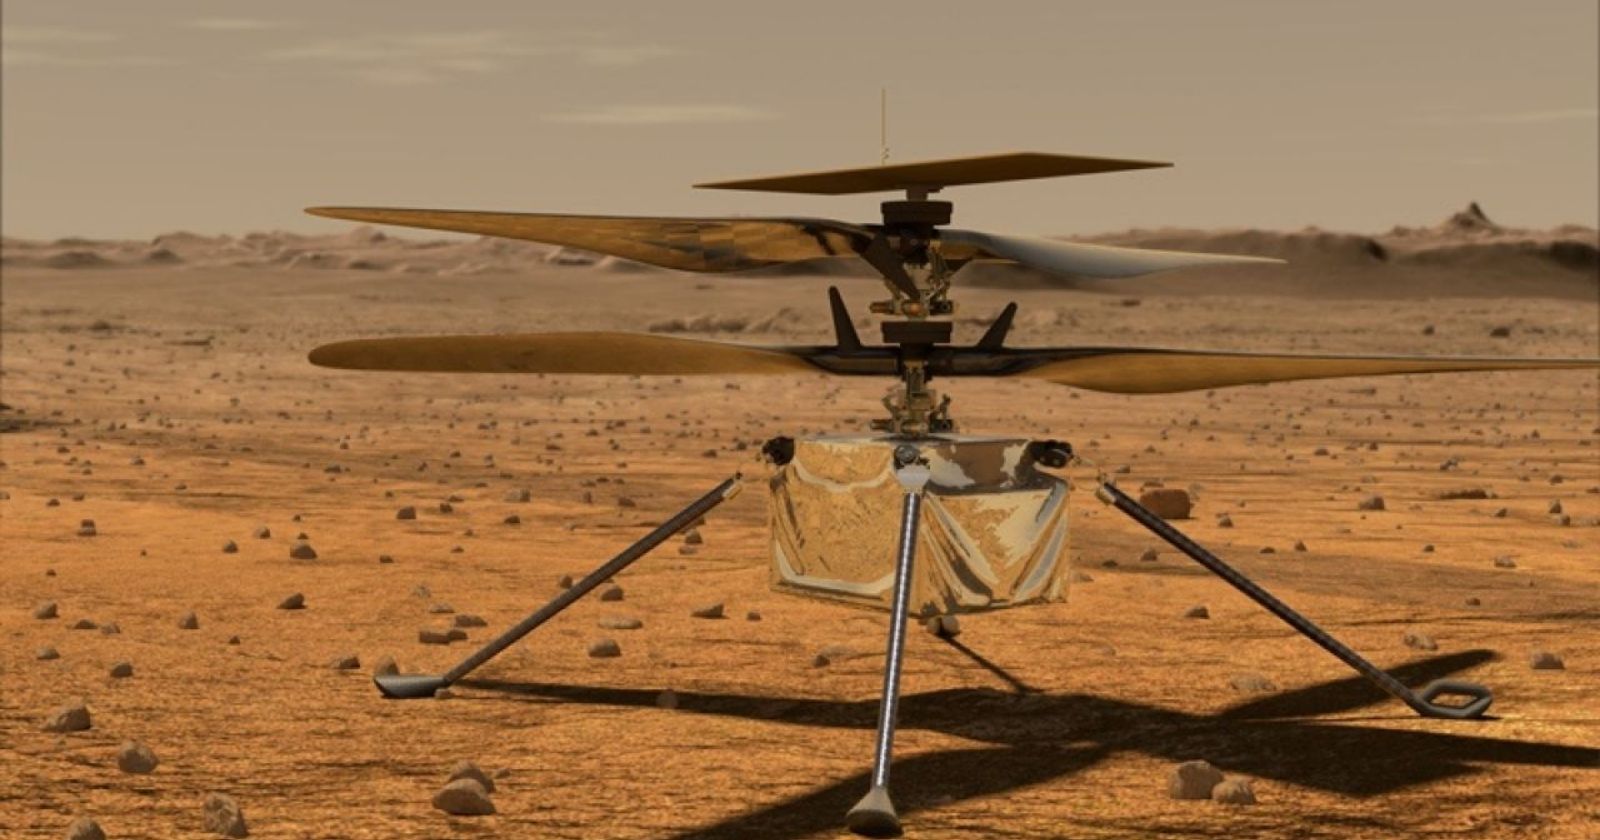 NASA’s Mars helicopter captures a spectacular image